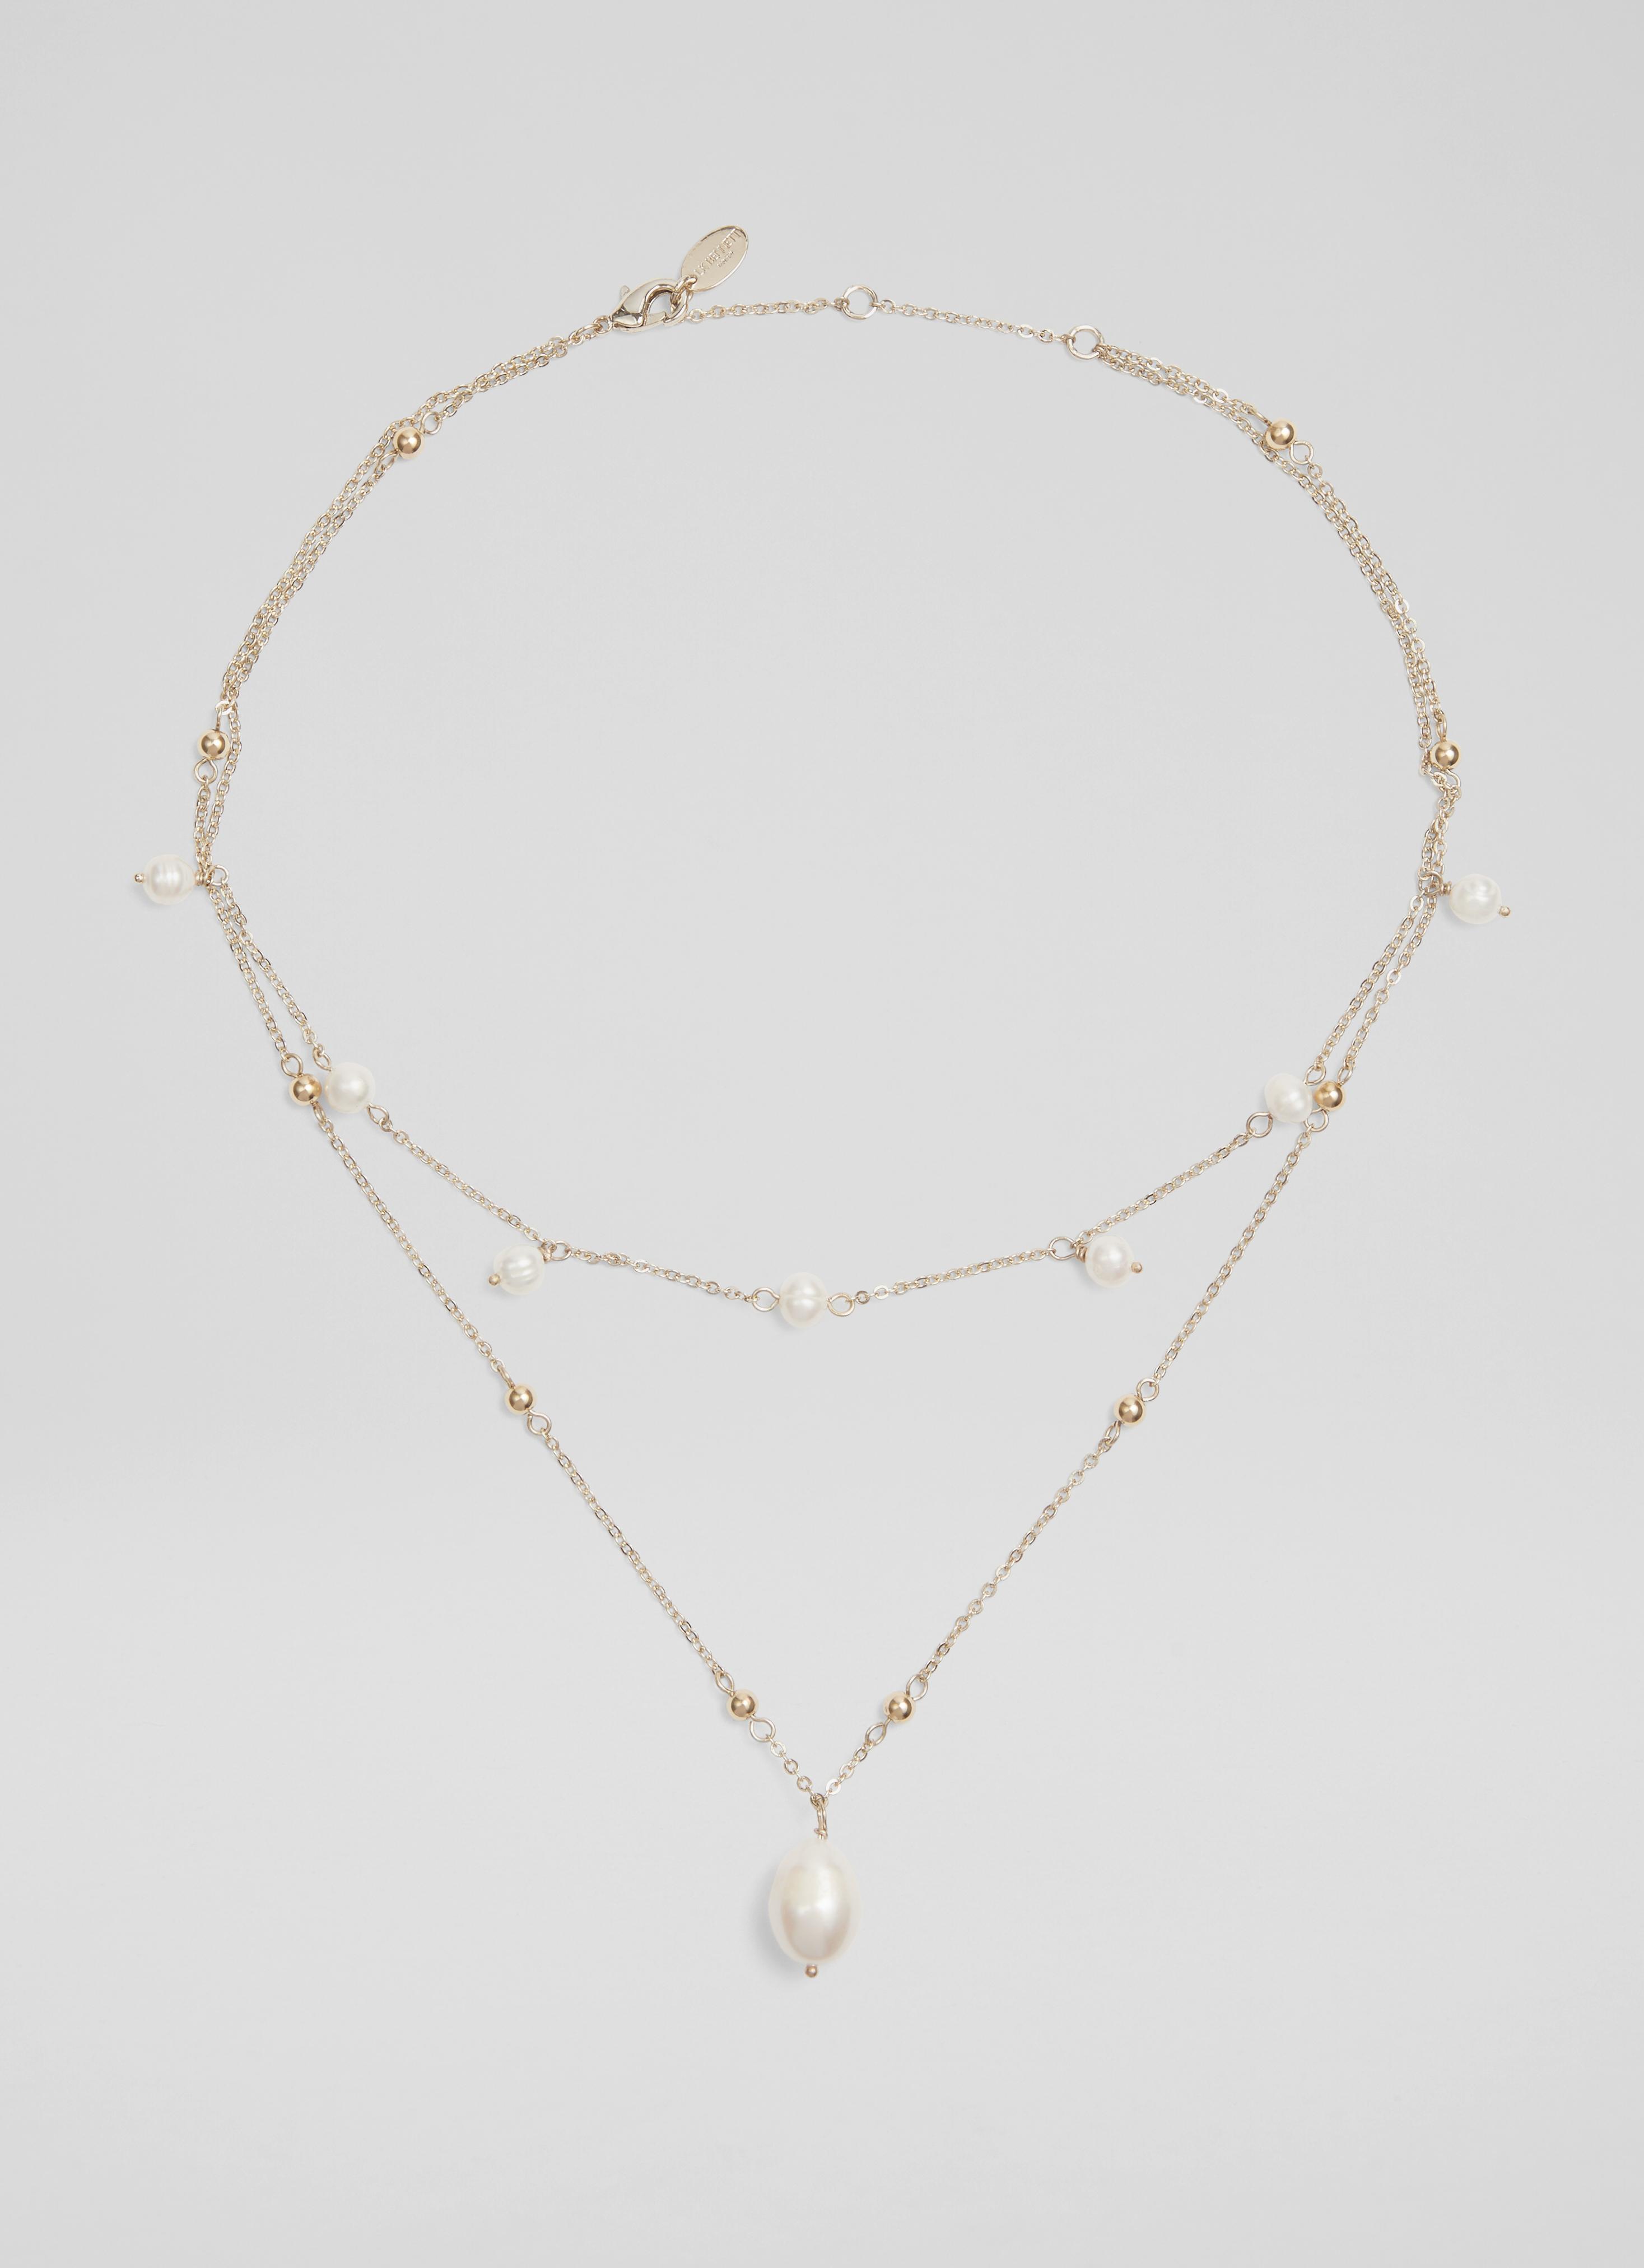 L.K.Bennett Clara Pearl and Gold Double Chain Necklace, Cream Gold